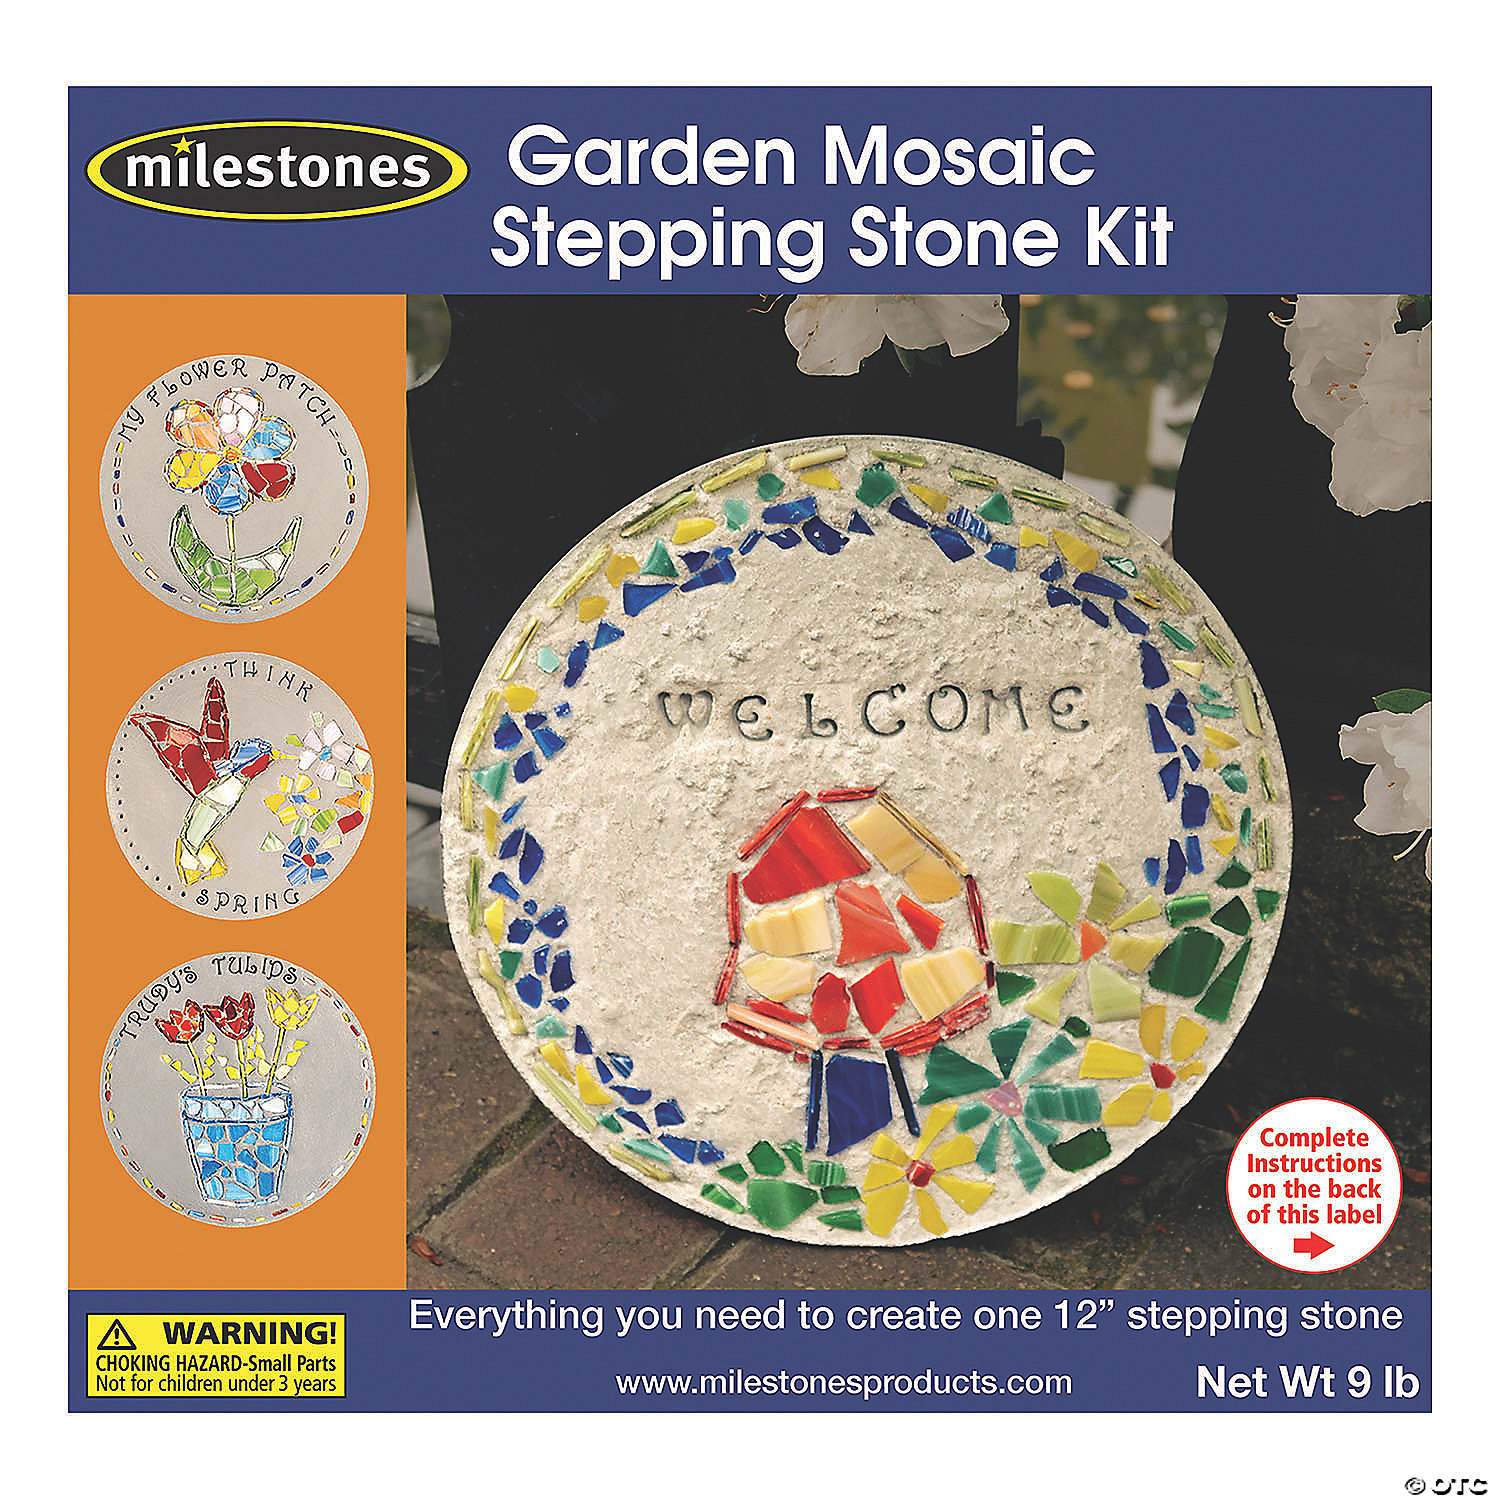 Lot of 2 Grafix Make Your Own Mosaic Stepping Stone Complete Kit Kids/Adults 